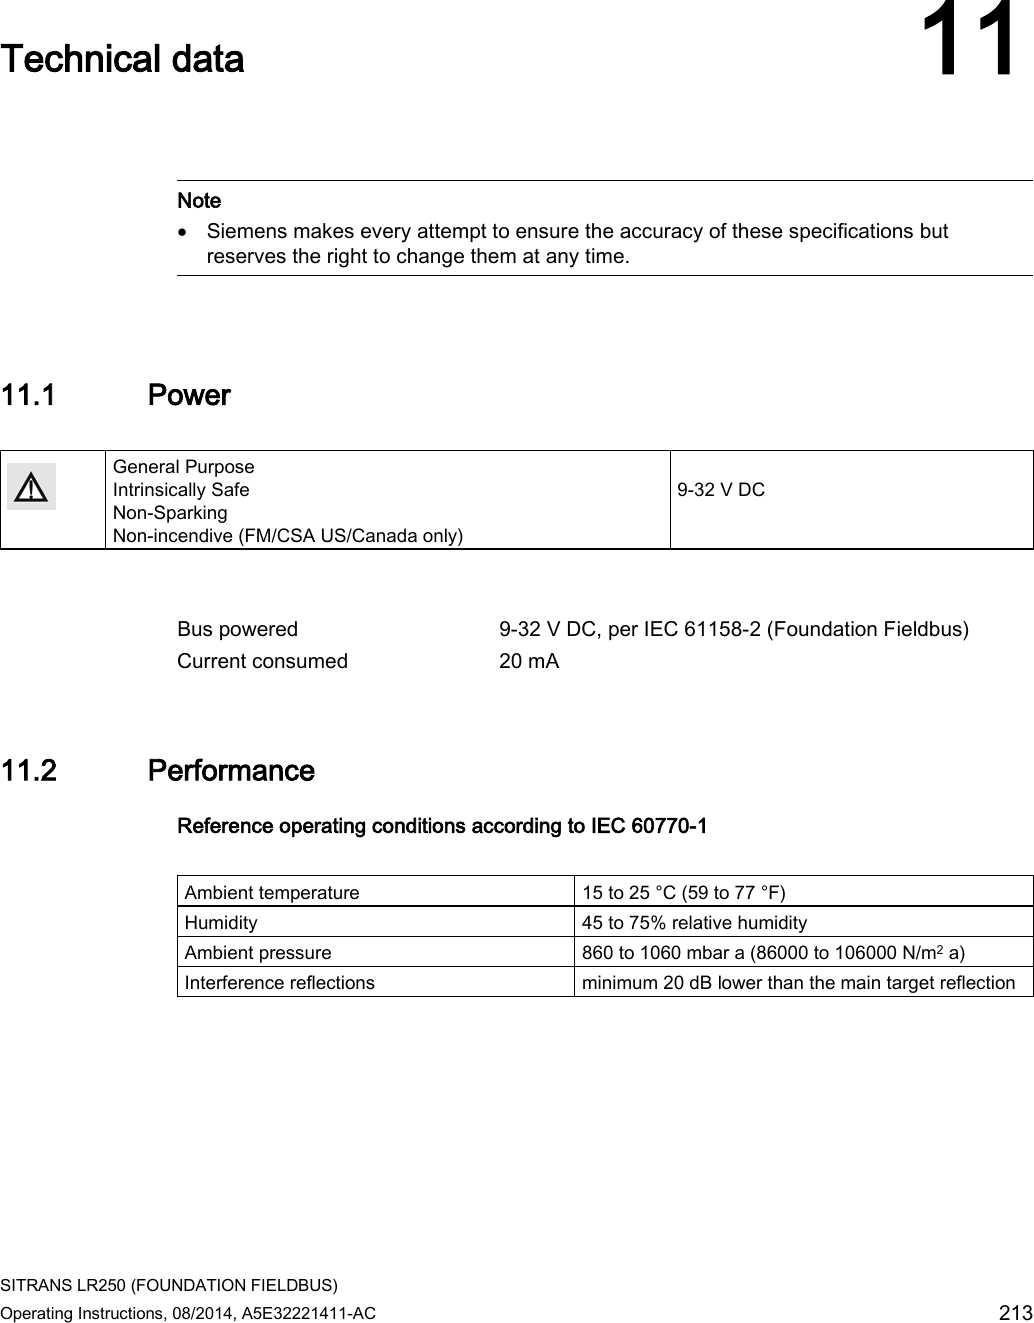  SITRANS LR250 (FOUNDATION FIELDBUS) Operating Instructions, 08/2014, A5E32221411-AC 213  Technical data 11    Note • Siemens makes every attempt to ensure the accuracy of these specifications but reserves the right to change them at any time.  11.1 Power   General Purpose Intrinsically Safe Non-Sparking Non-incendive (FM/CSA US/Canada only)   9-32 V DC    Bus powered  9-32 V DC, per IEC 61158-2 (Foundation Fieldbus) Current consumed 20 mA 11.2 Performance Reference operating conditions according to IEC 60770-1  Ambient temperature 15 to 25 °C (59 to 77 °F) Humidity 45 to 75% relative humidity Ambient pressure 860 to 1060 mbar a (86000 to 106000 N/m2 a) Interference reflections minimum 20 dB lower than the main target reflection 